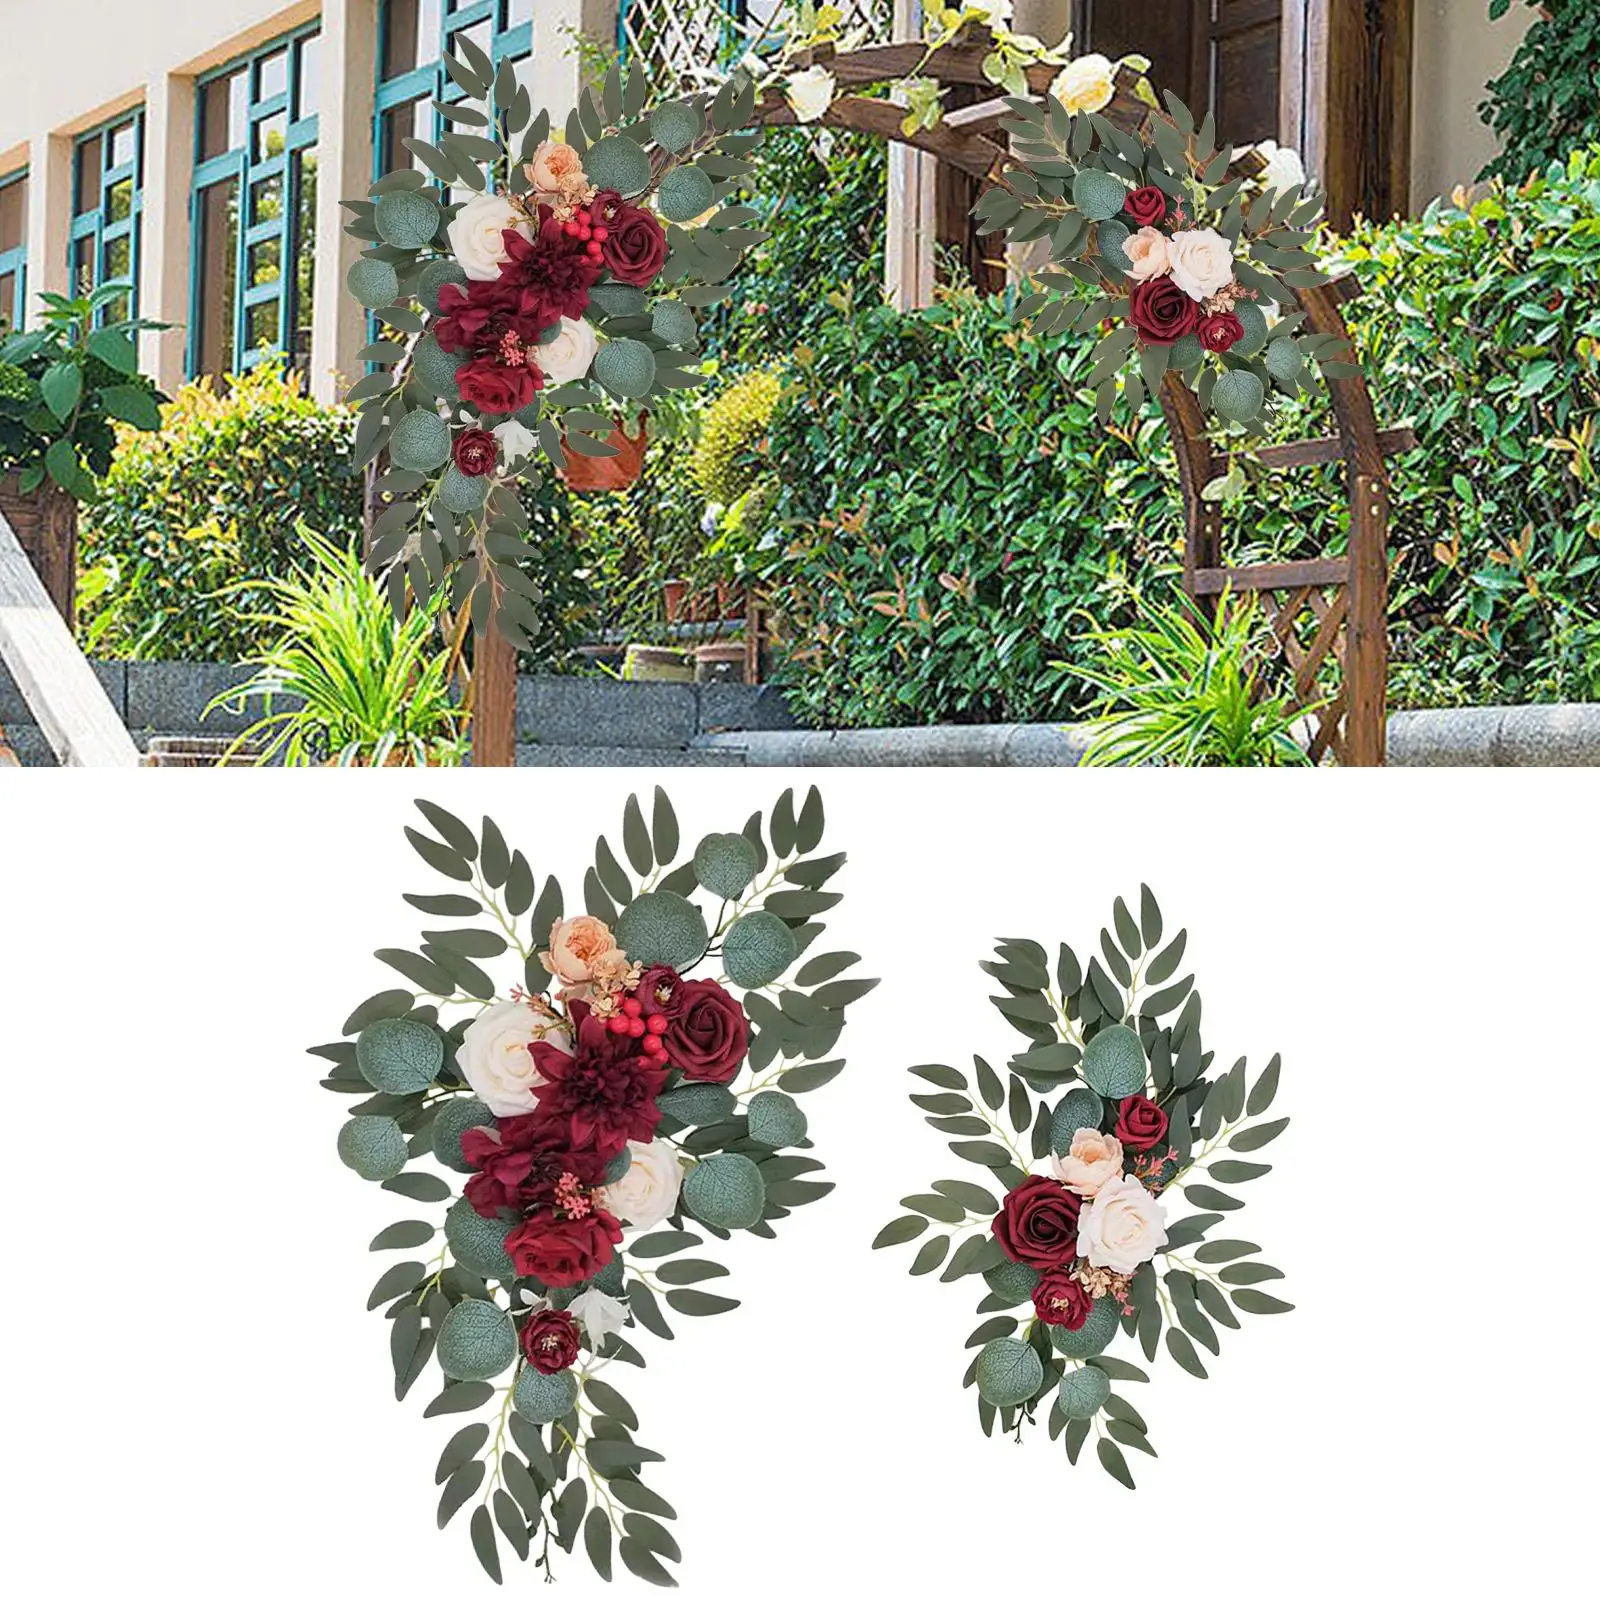 2 Pieces Artificial Flower Swag Sunflowers Decoration Rustic Display Fake Plant Flower Garland for Garden Door Ceremony Lintel